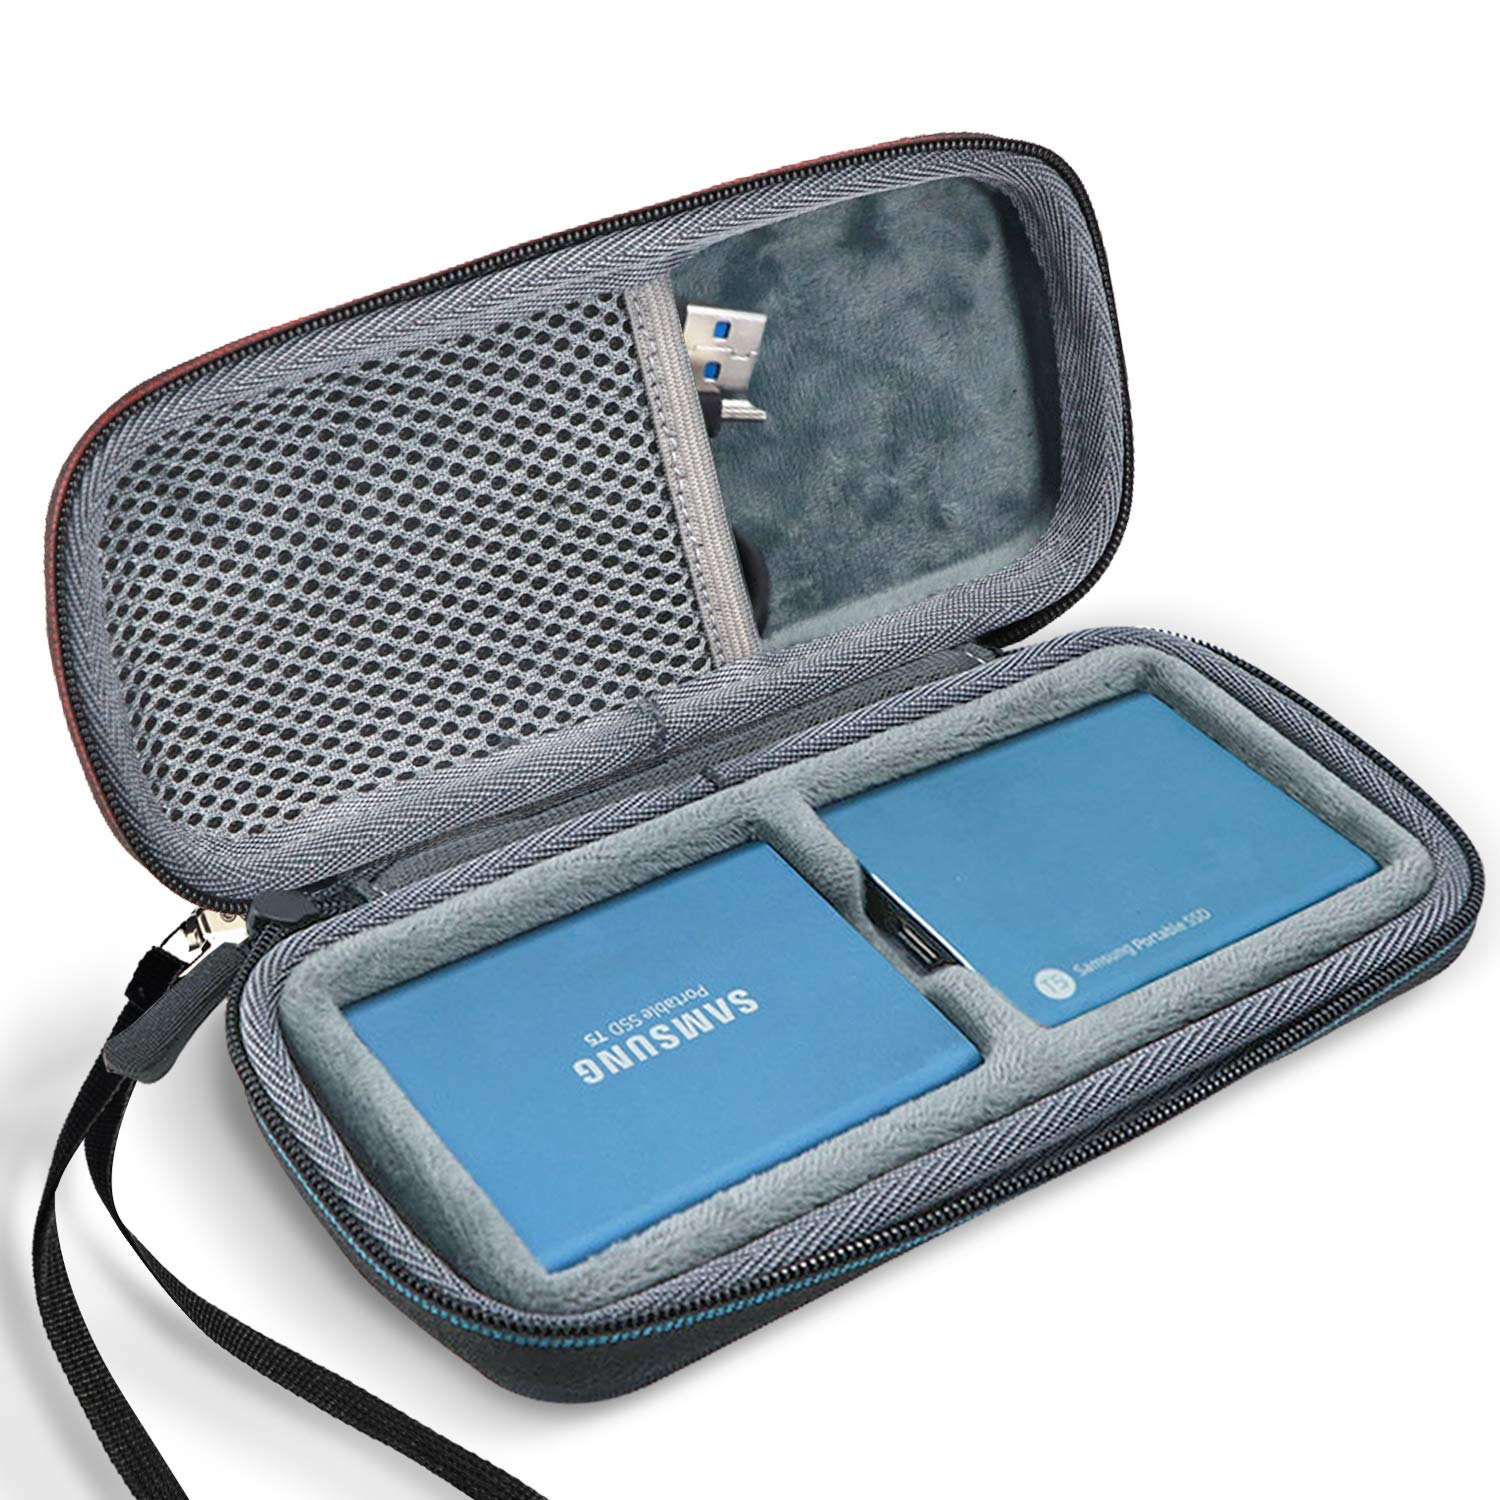 Travel Carrying Case for Samsung T5 / T3 Portable Drives